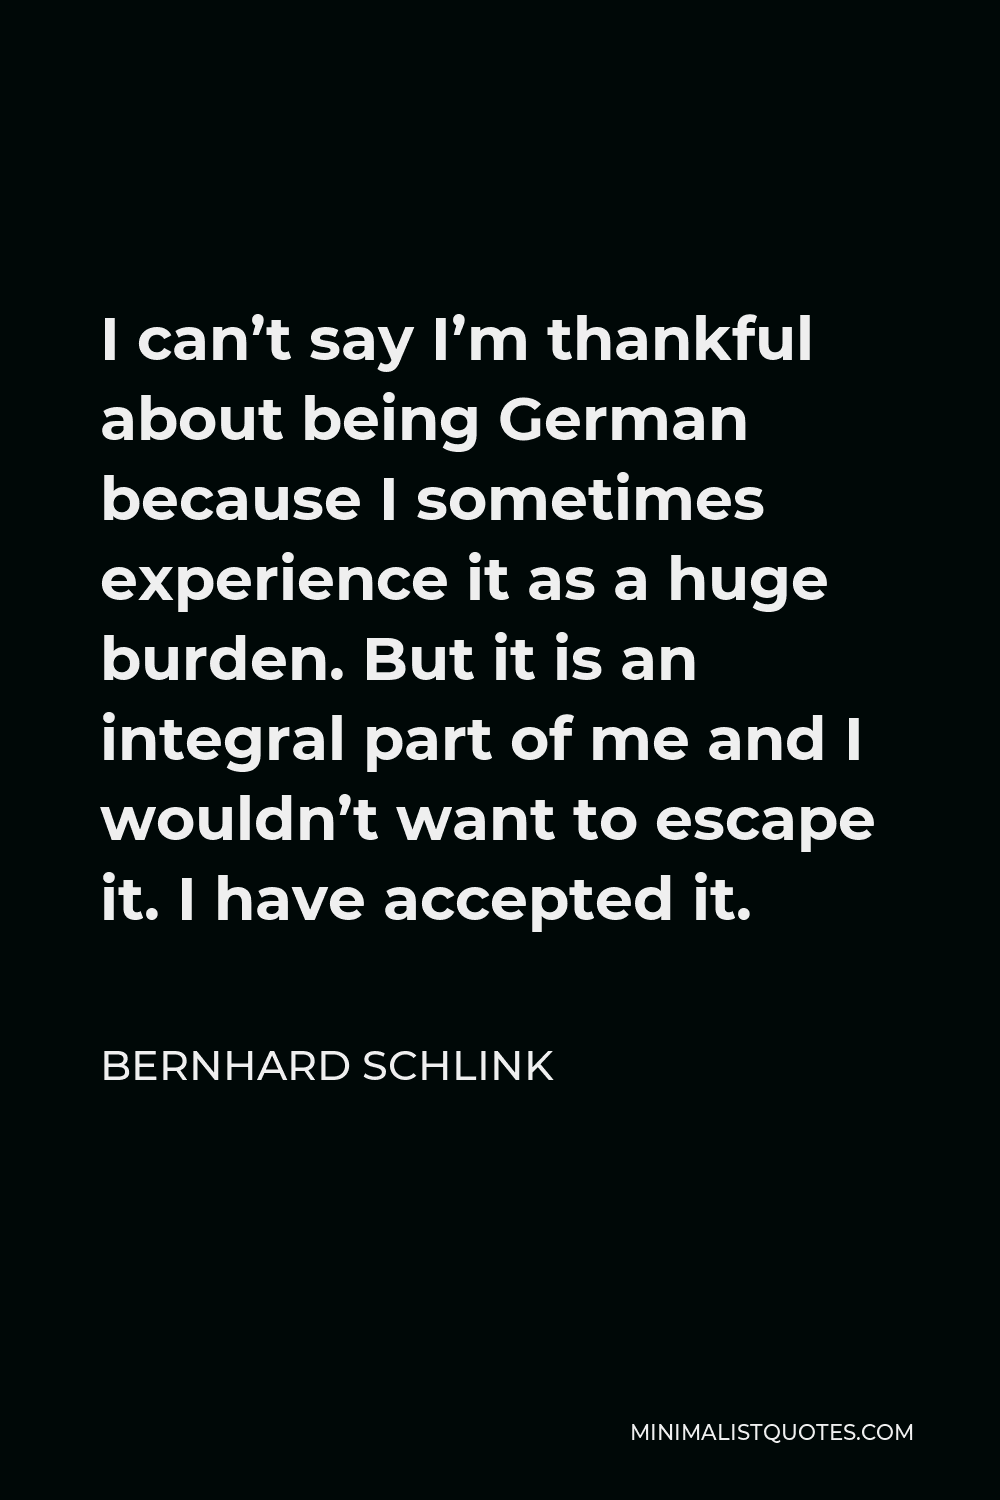 Bernhard Schlink Quote - I can’t say I’m thankful about being German because I sometimes experience it as a huge burden. But it is an integral part of me and I wouldn’t want to escape it. I have accepted it.